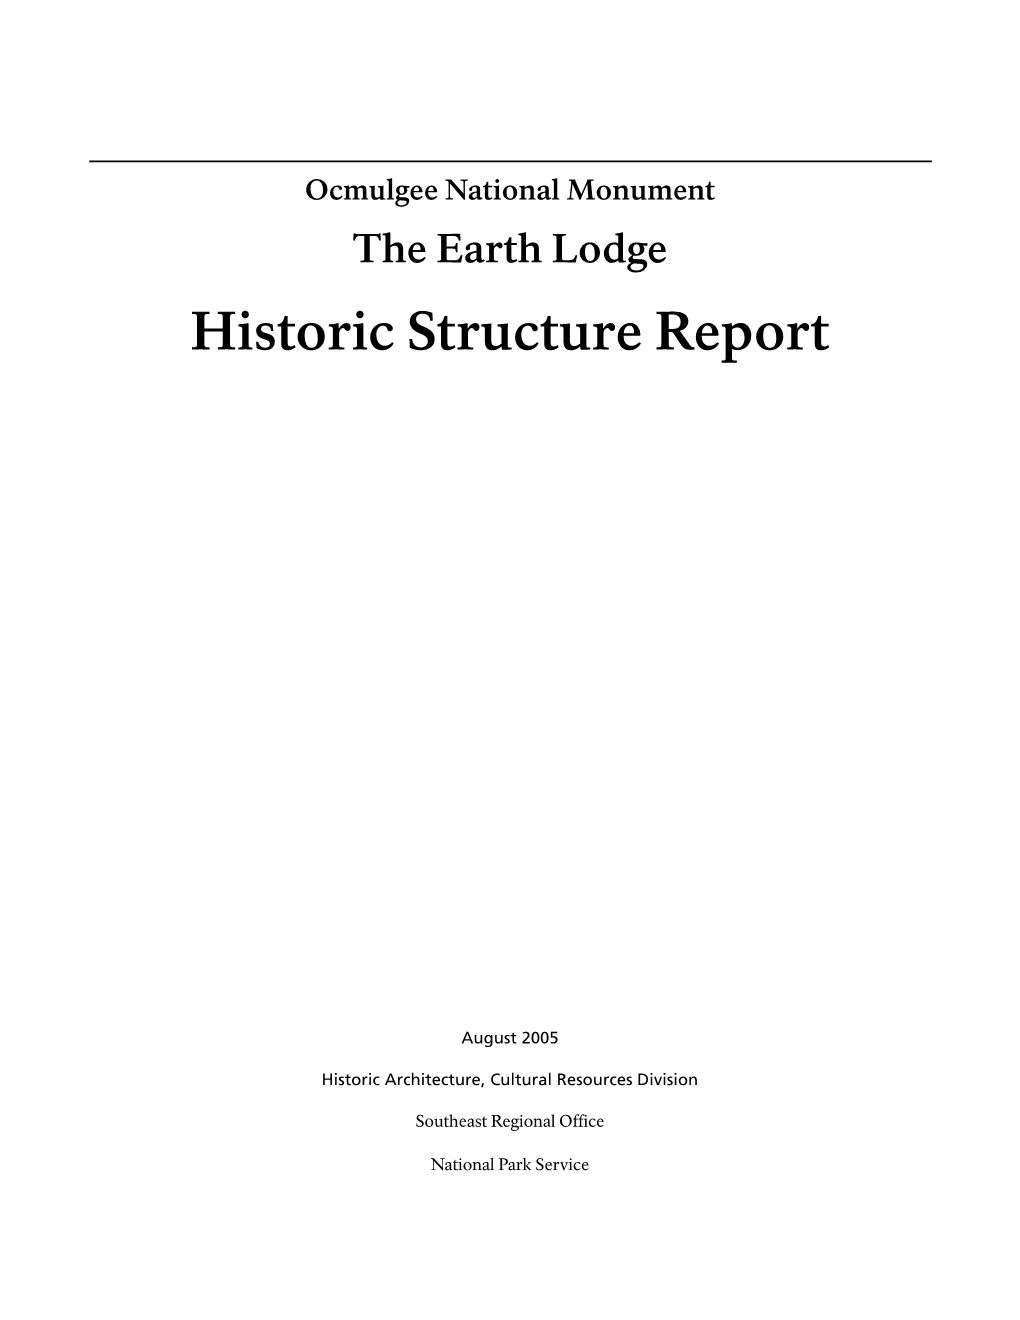 Ocmulgee National Monument the Earth Lodge Historic Structure Report